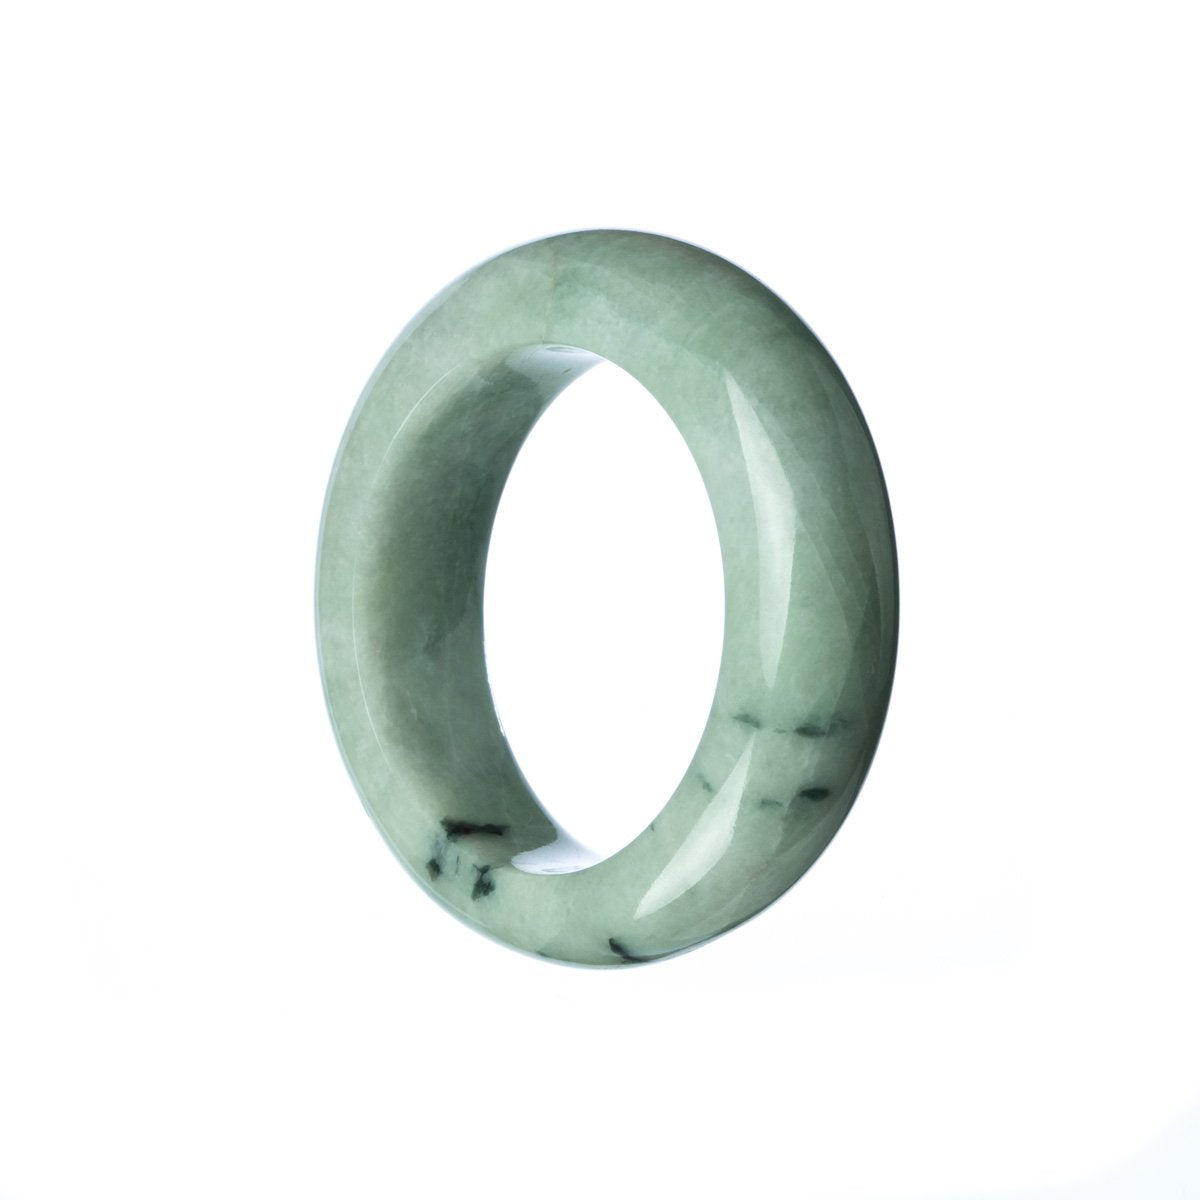 A child-sized semi-round green jade bangle bracelet made of genuine grade A jadeite jade, perfect for a touch of elegance and style.